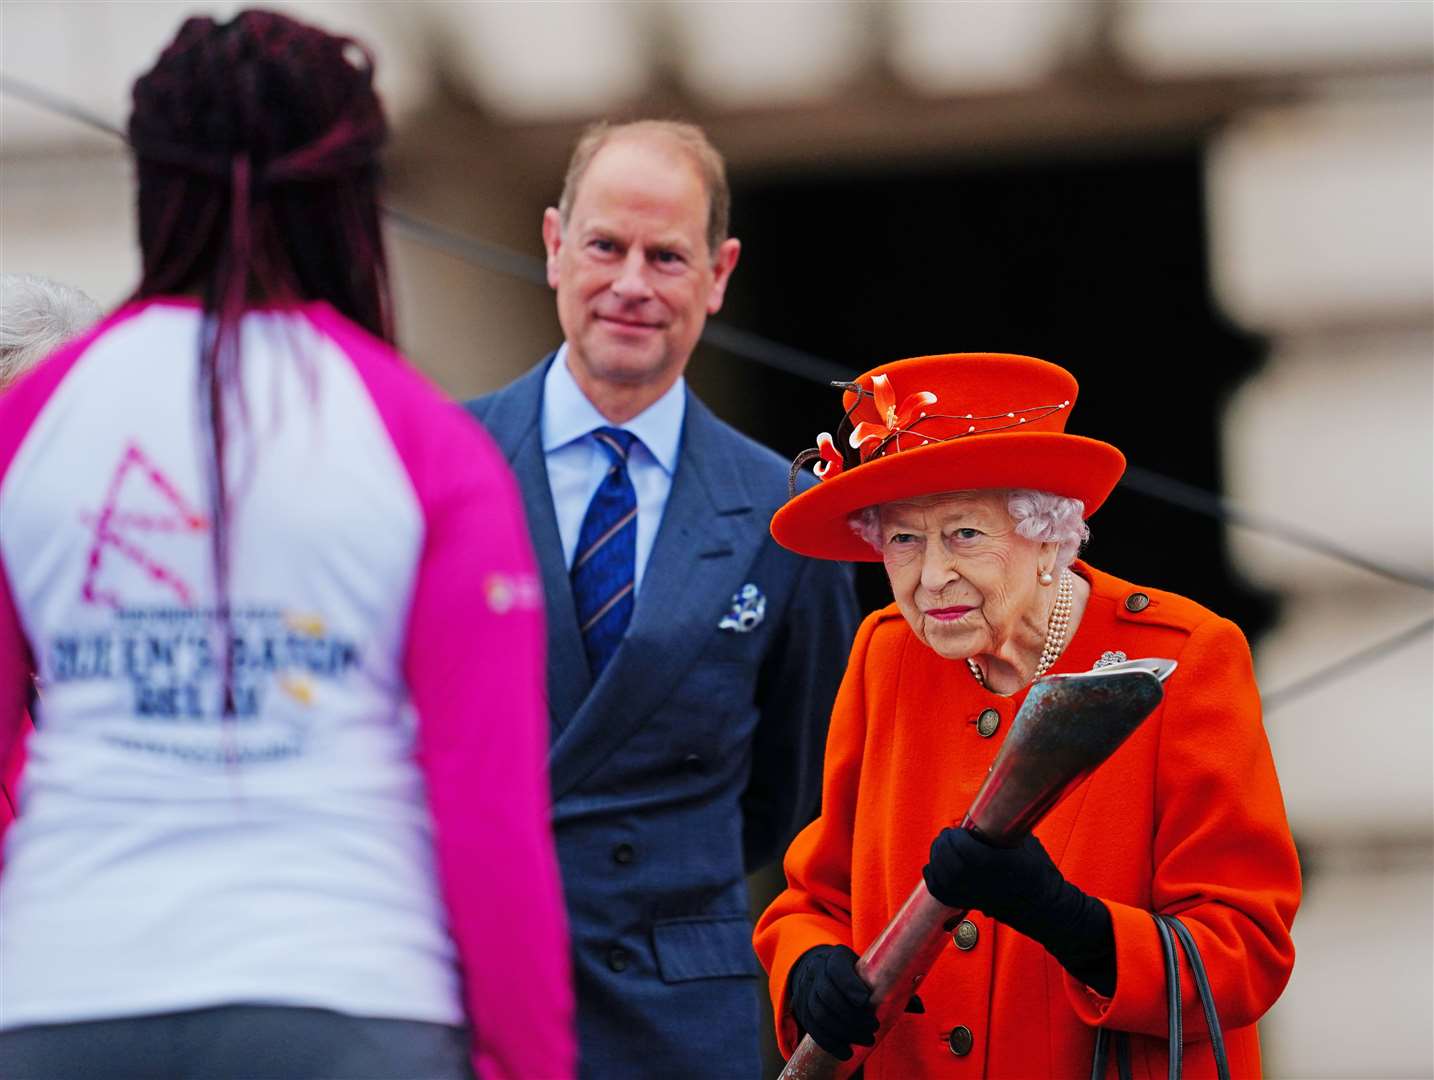 The Queen won't be in Birmingham but her son Prince Edward will be among the Royal Family members there instead